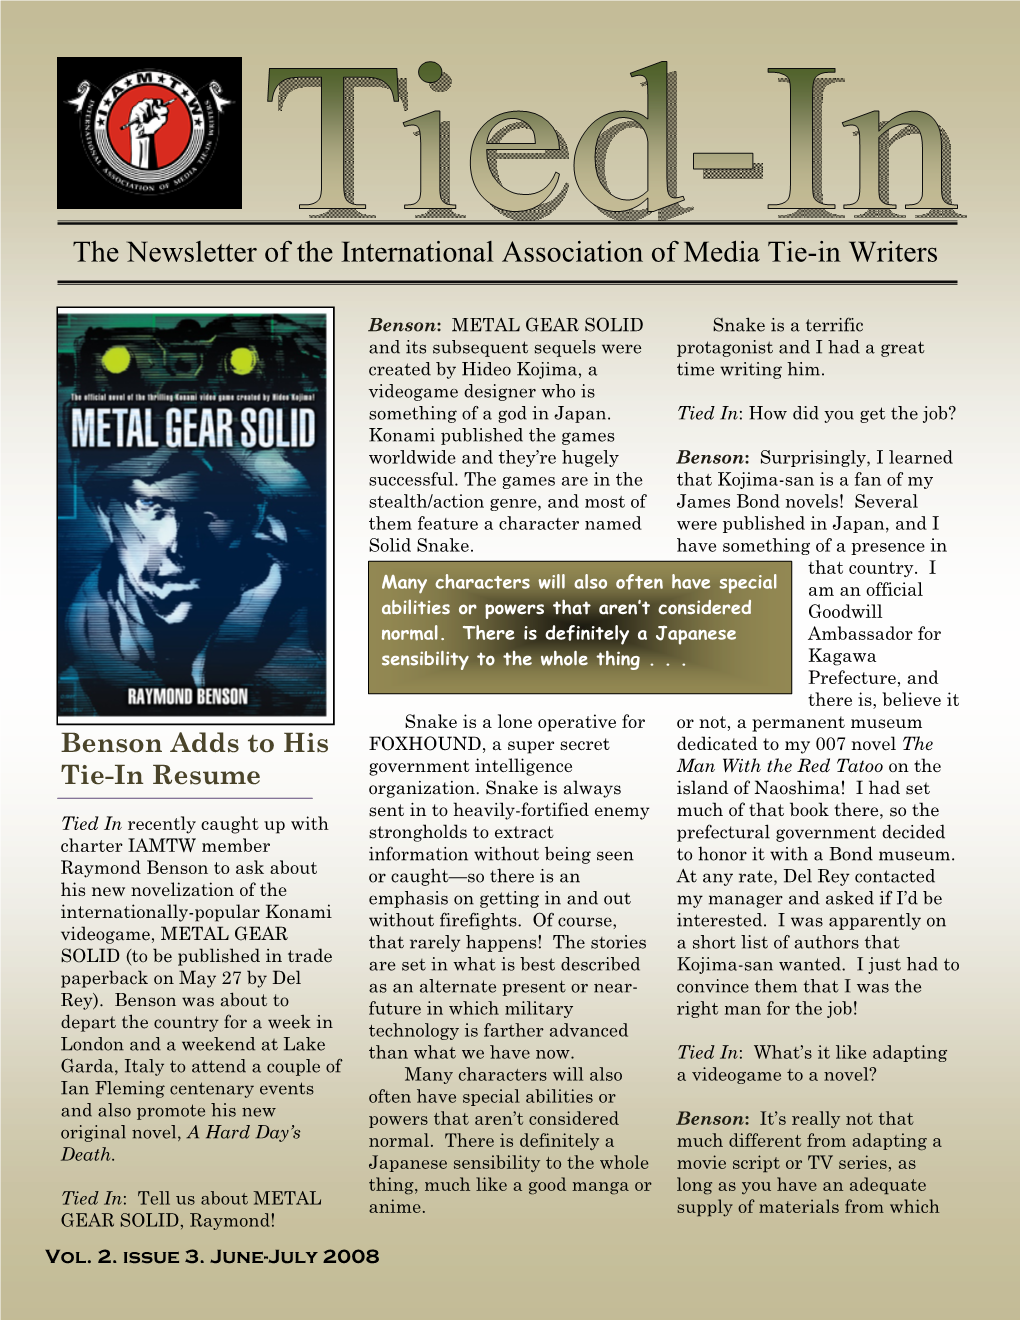 The Newsletter of the International Association of Media Tie-In Writers